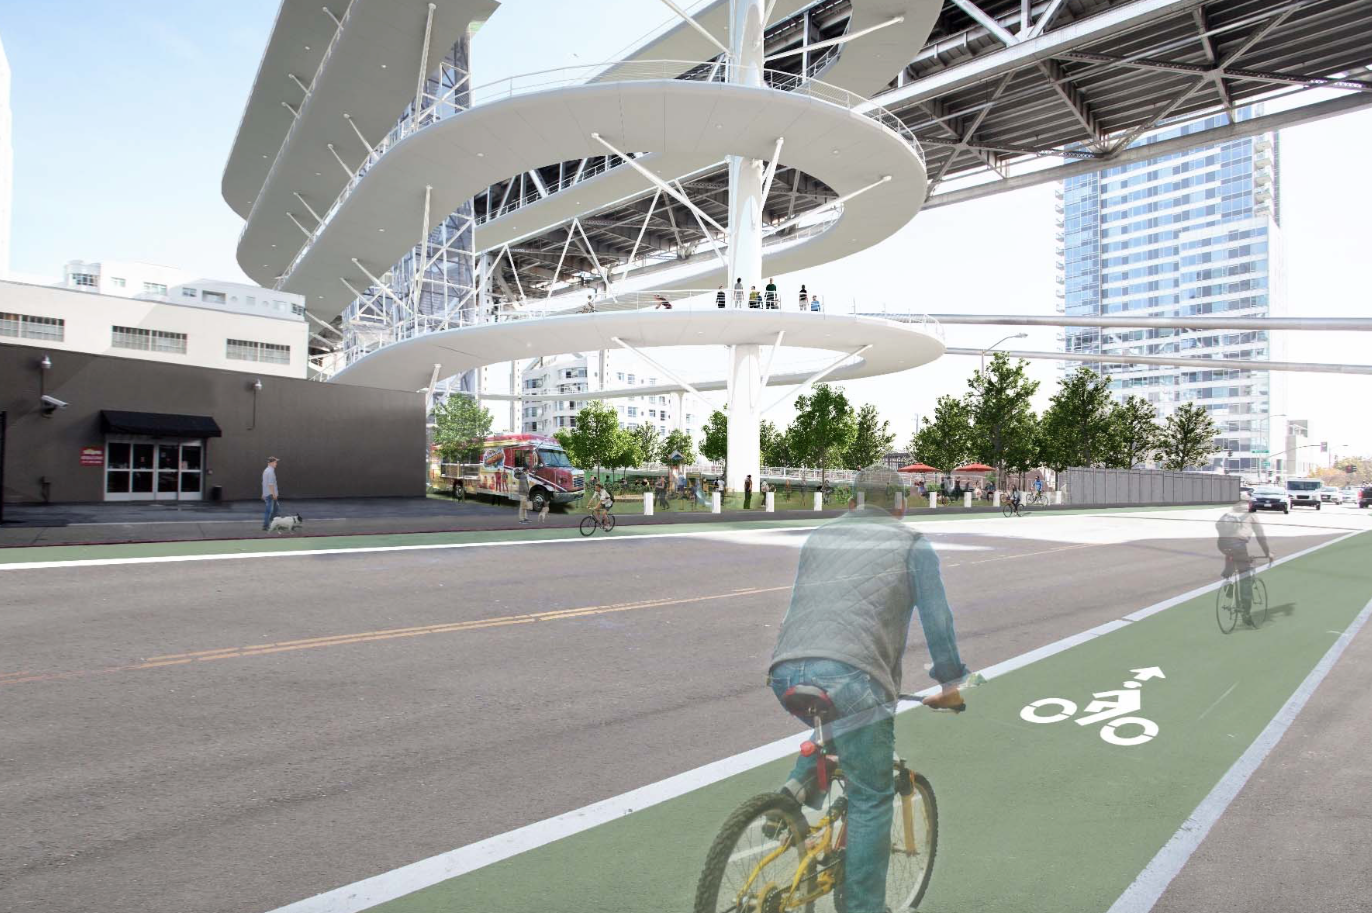 This Ridiculous Ramp Is SF’s Best Idea For A Bike Path Across The Entire Bay Bridge